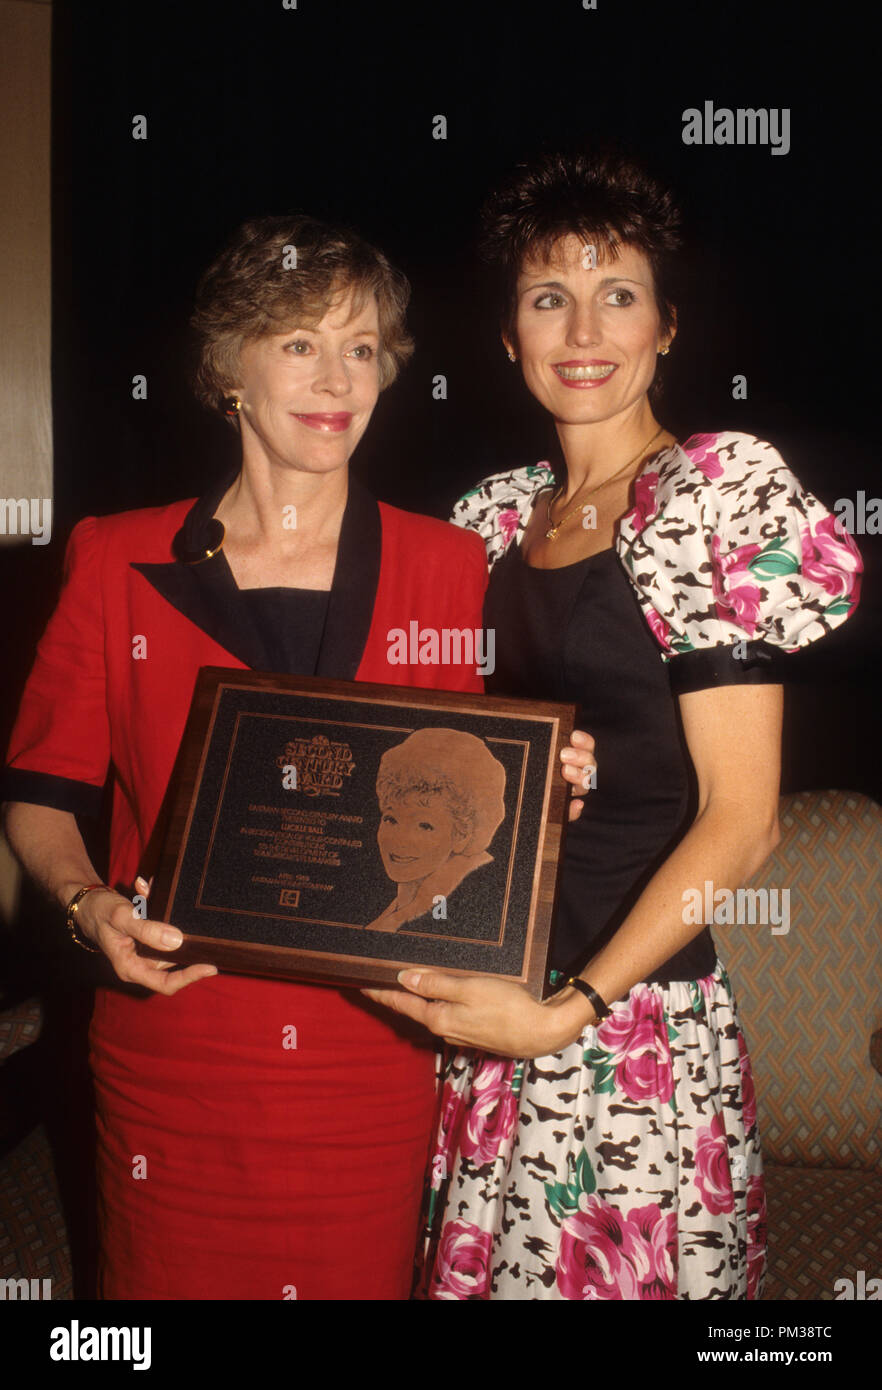 Carol Burnett and Lucy Arnaz at the Eastman Second Century Award Ceremony honoring Lucille Ball, 1989.  File Reference # 1238 022THA Stock Photo